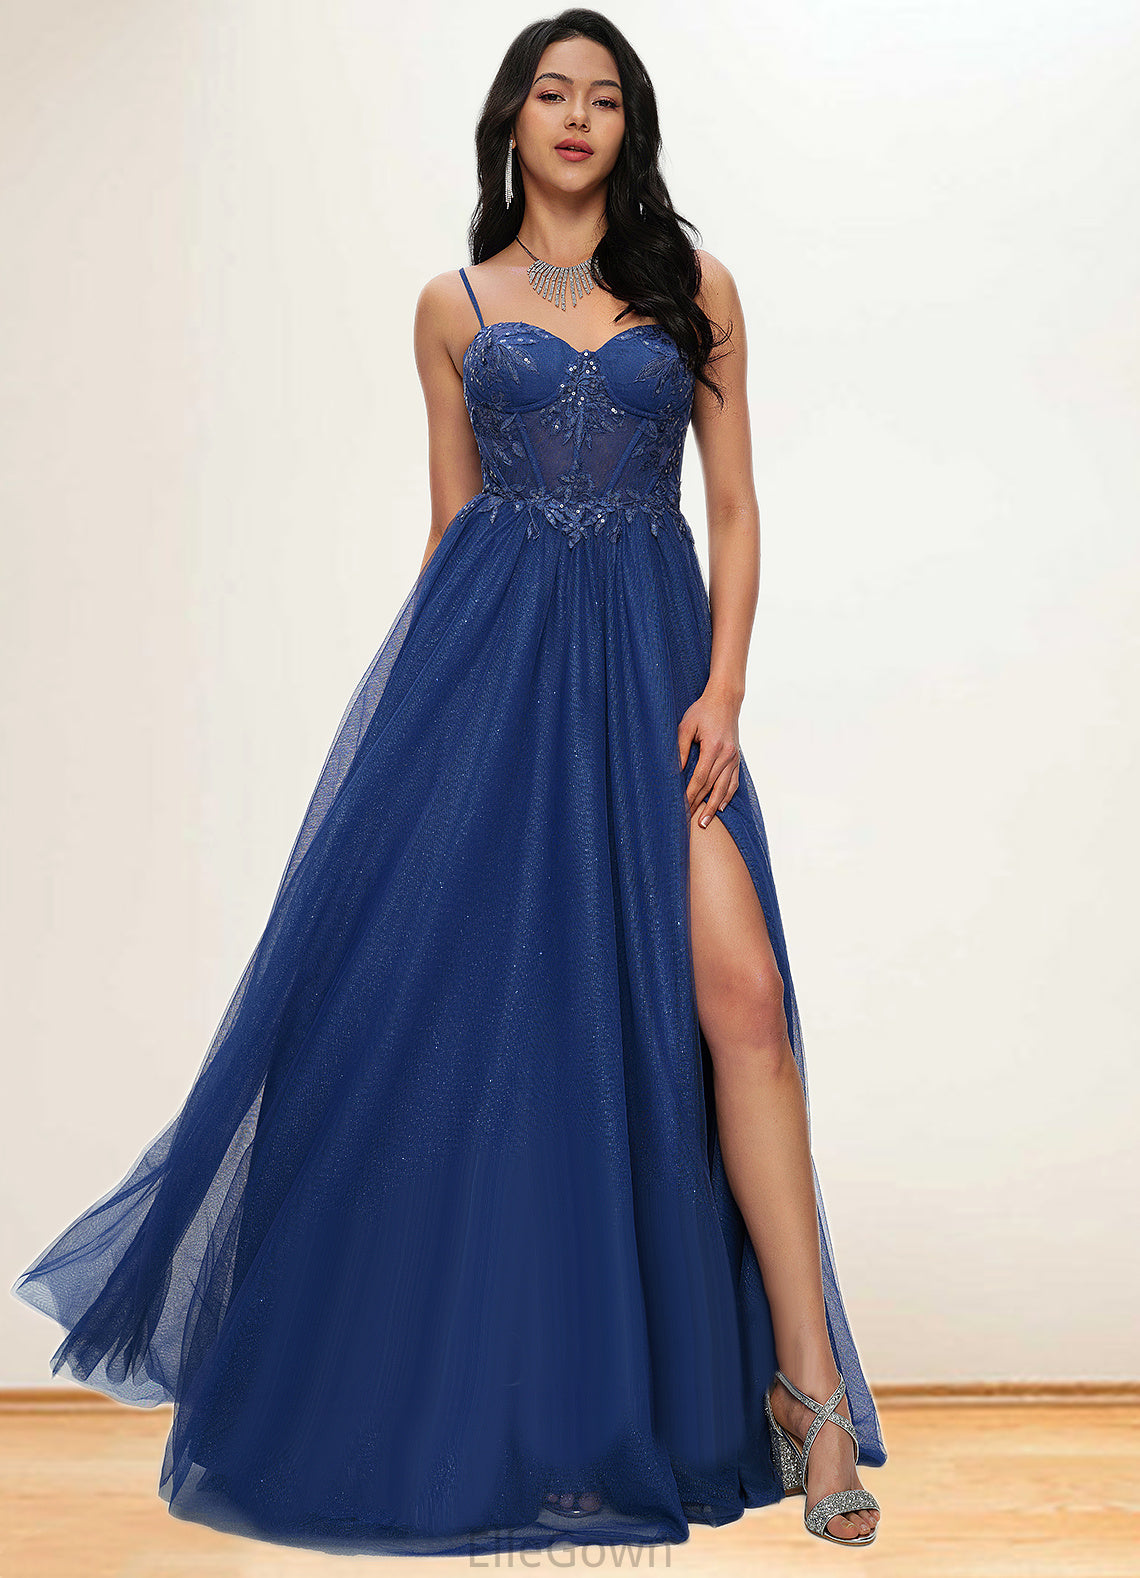 Charity Ball-Gown/Princess Sweetheart Sweep Train Tulle Prom Dresses With Appliques Lace Sequins DEP0022210